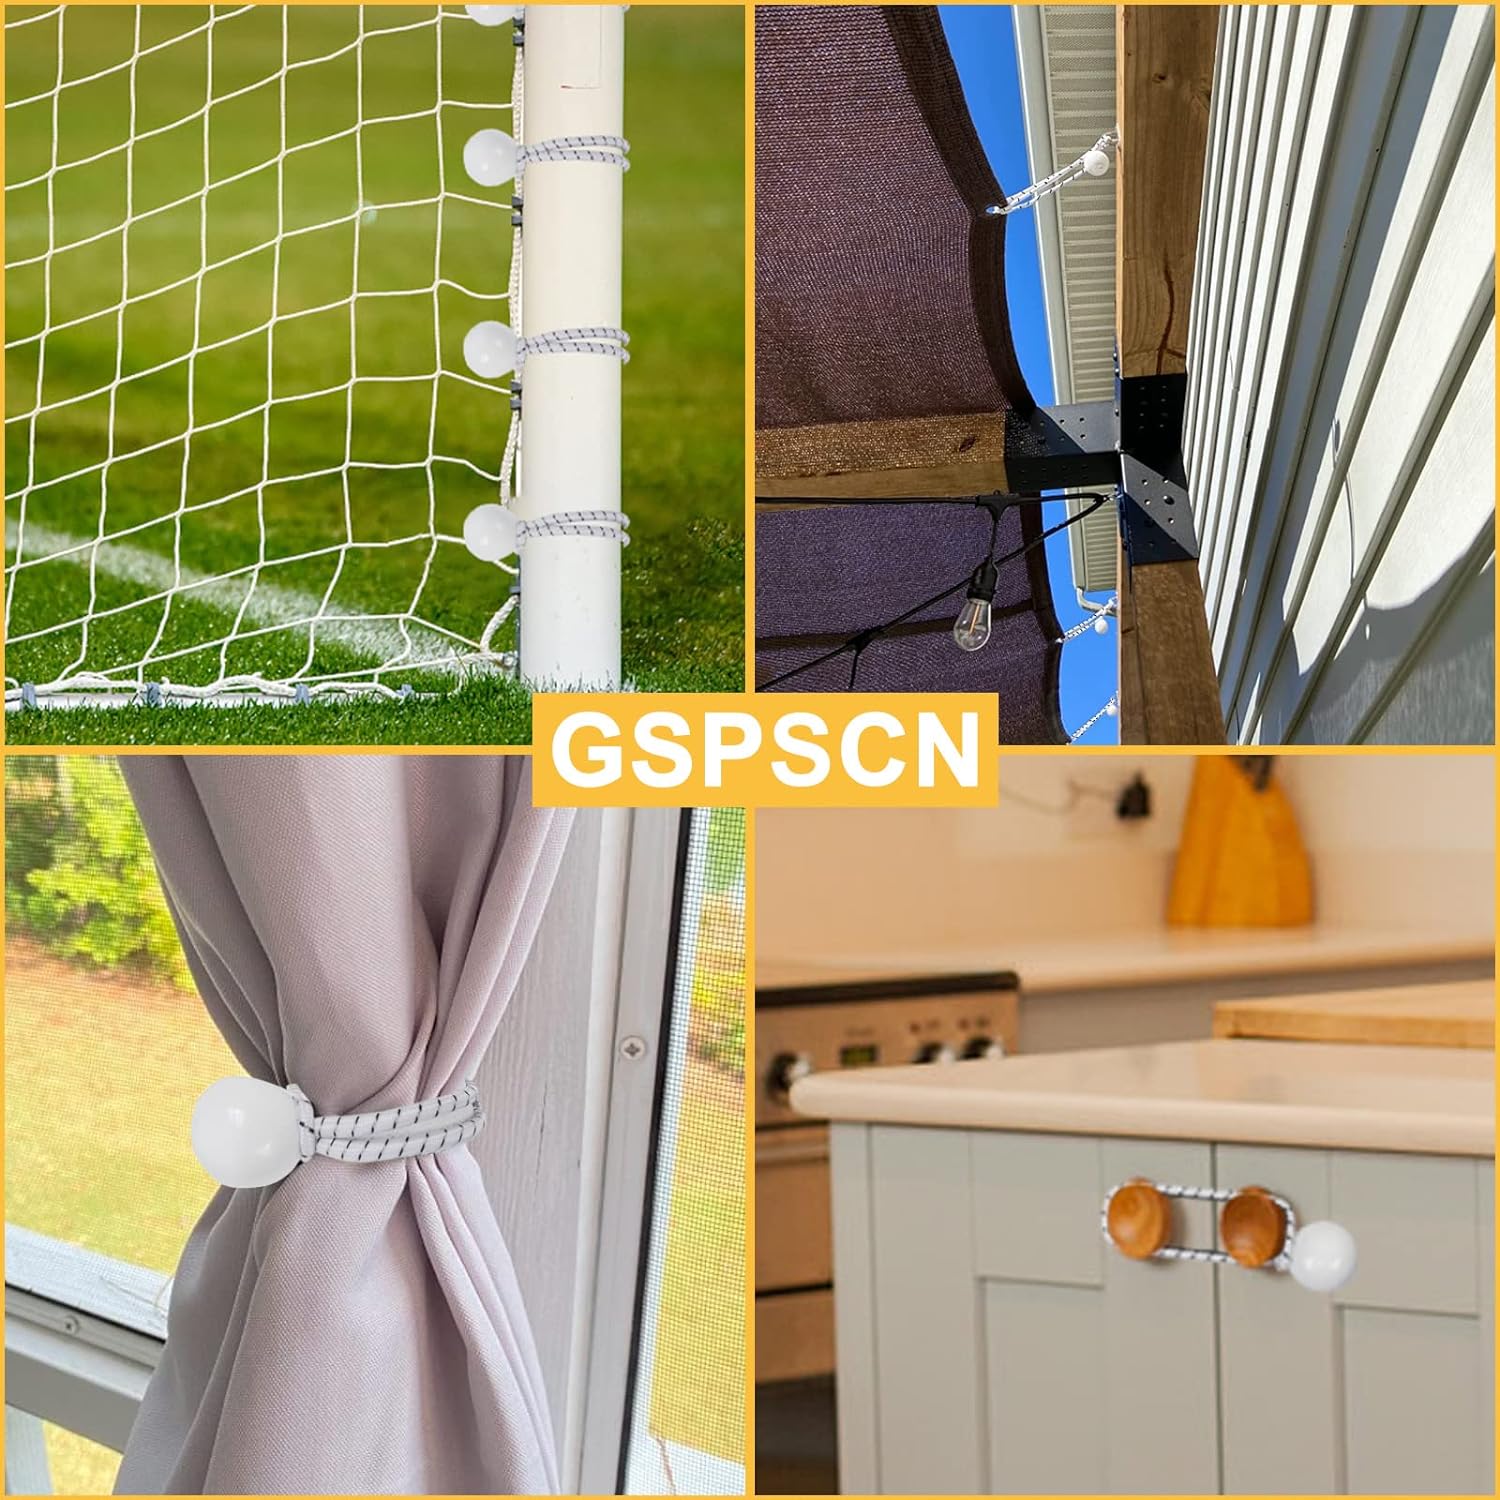 GSPSCN 50 Packs Ball Bungee Cord 6 Inch Gazebo Canopy Tarp Tie Down Cords Heavy Duty Elastic Bungee Cords Ball with UV Resistant for C